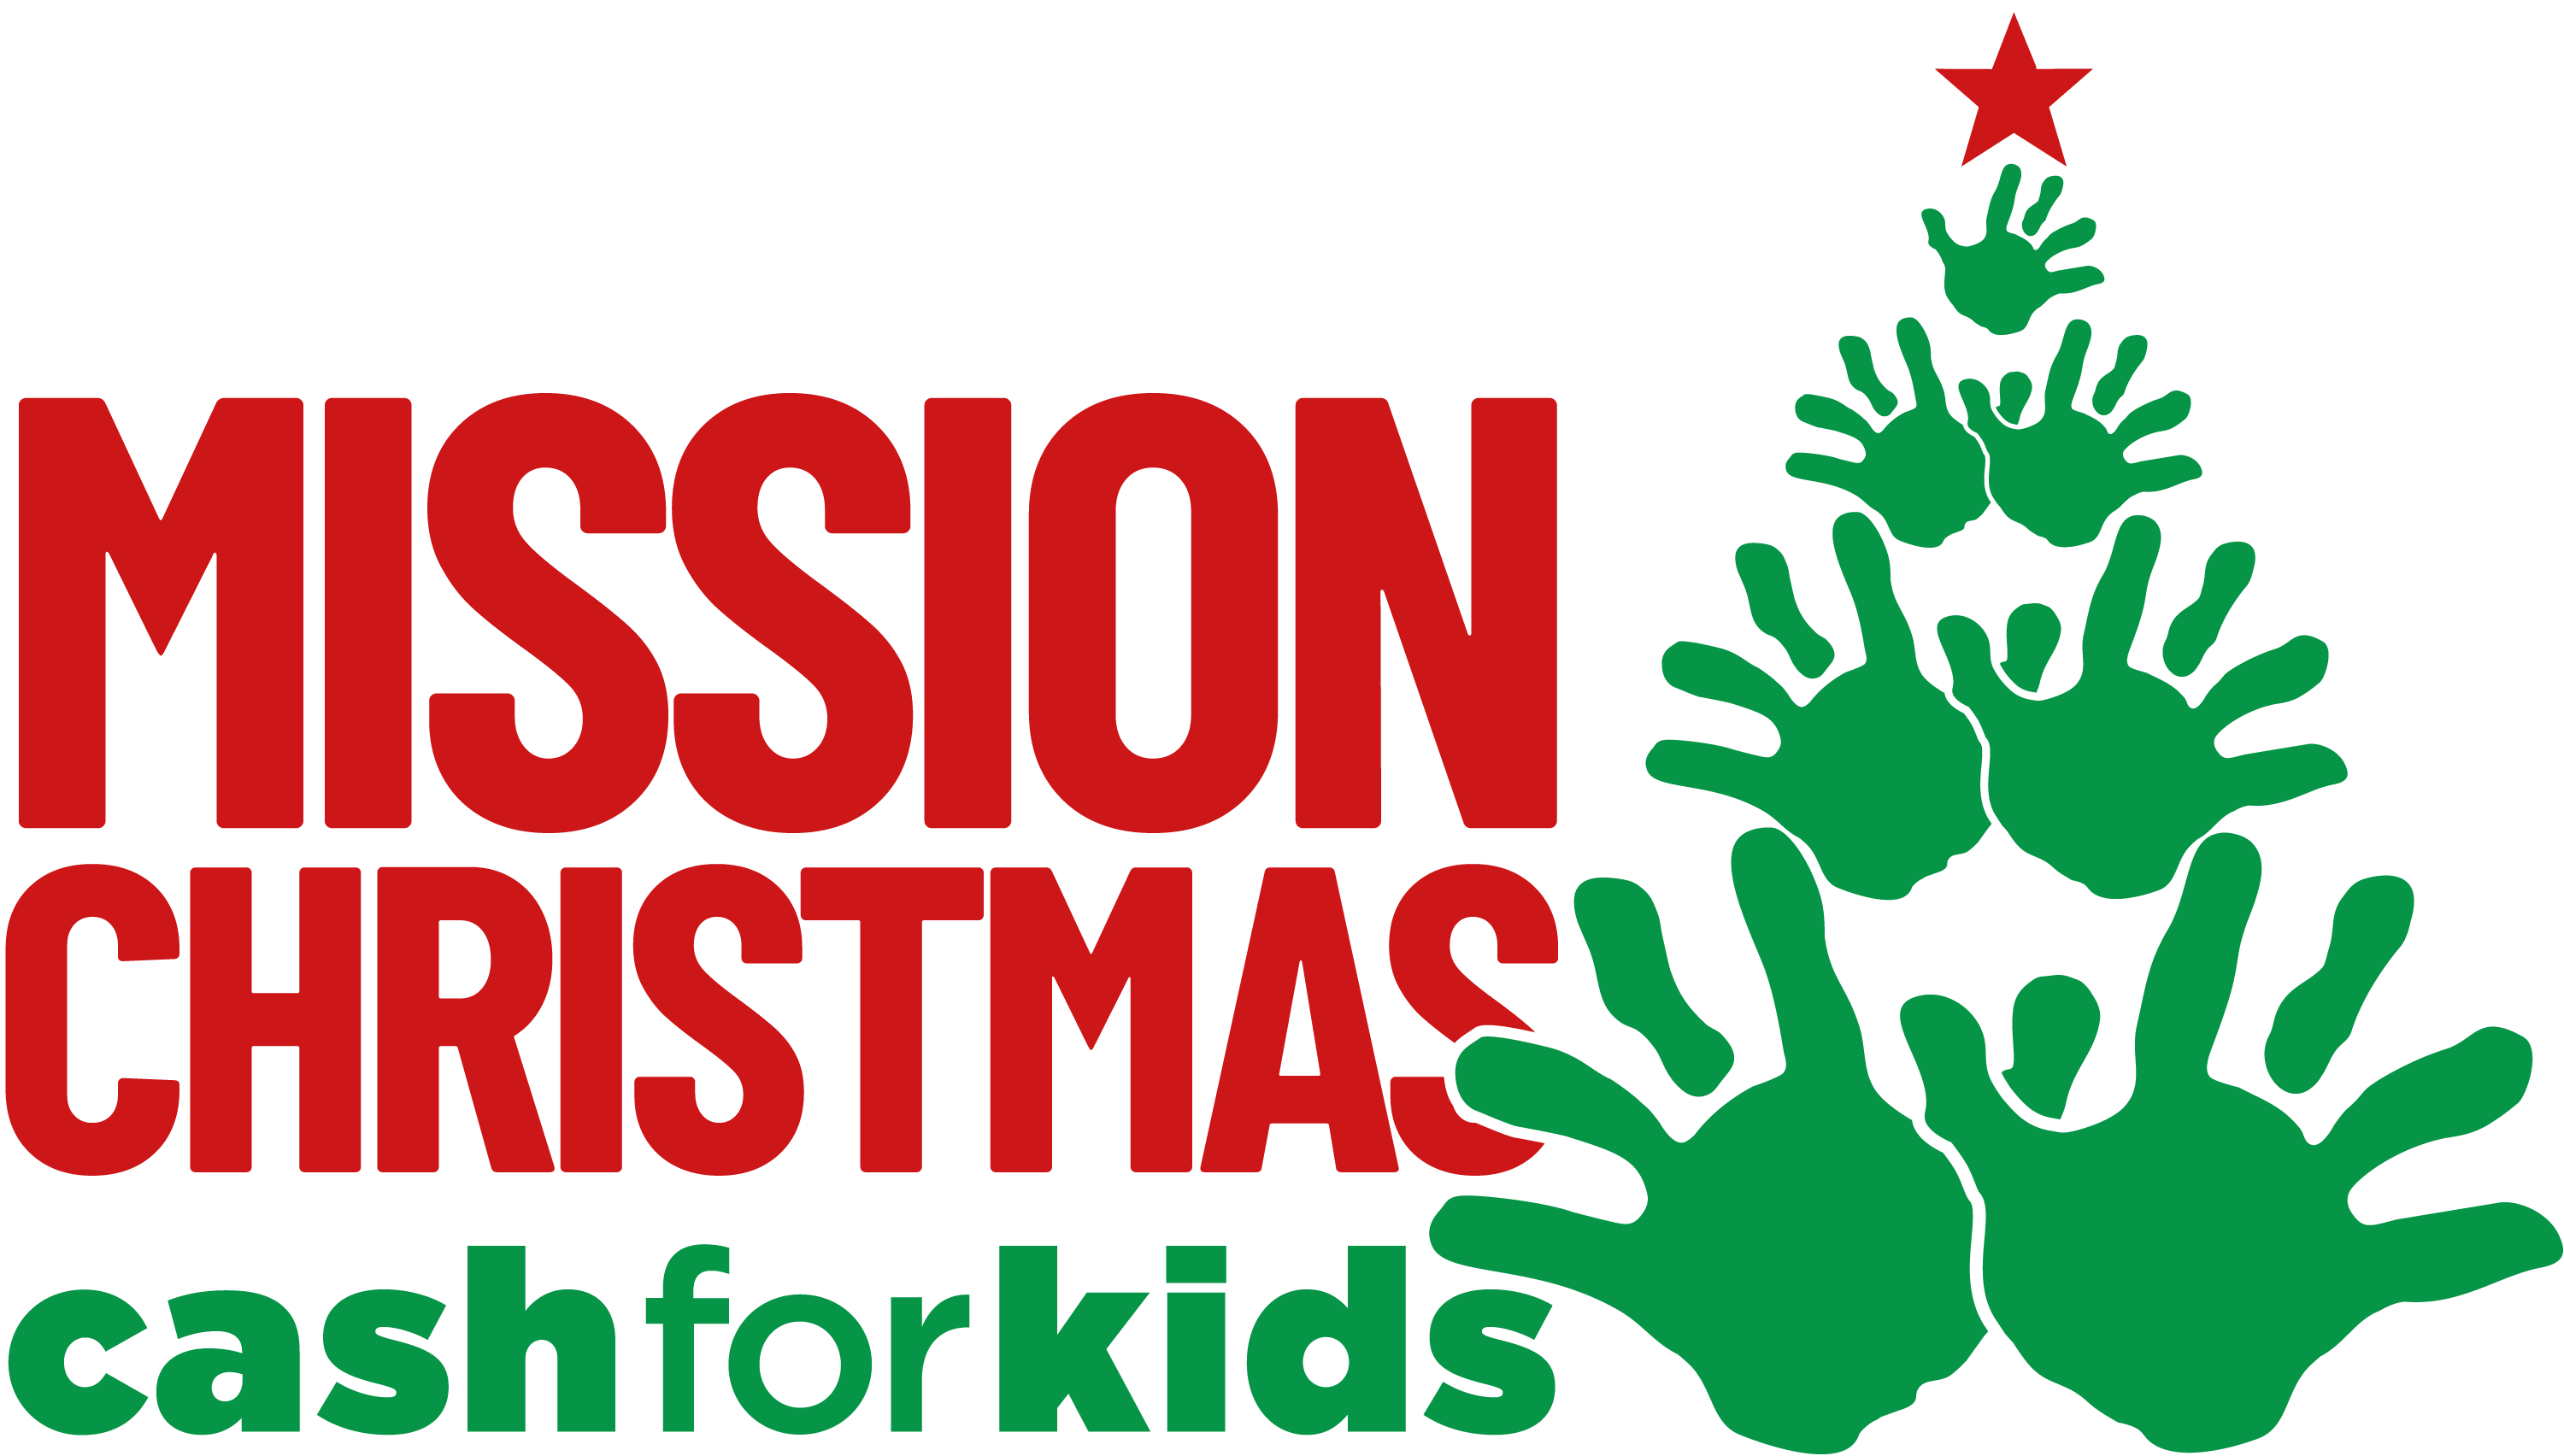 Cash for kids logo with Mission Christmas Title